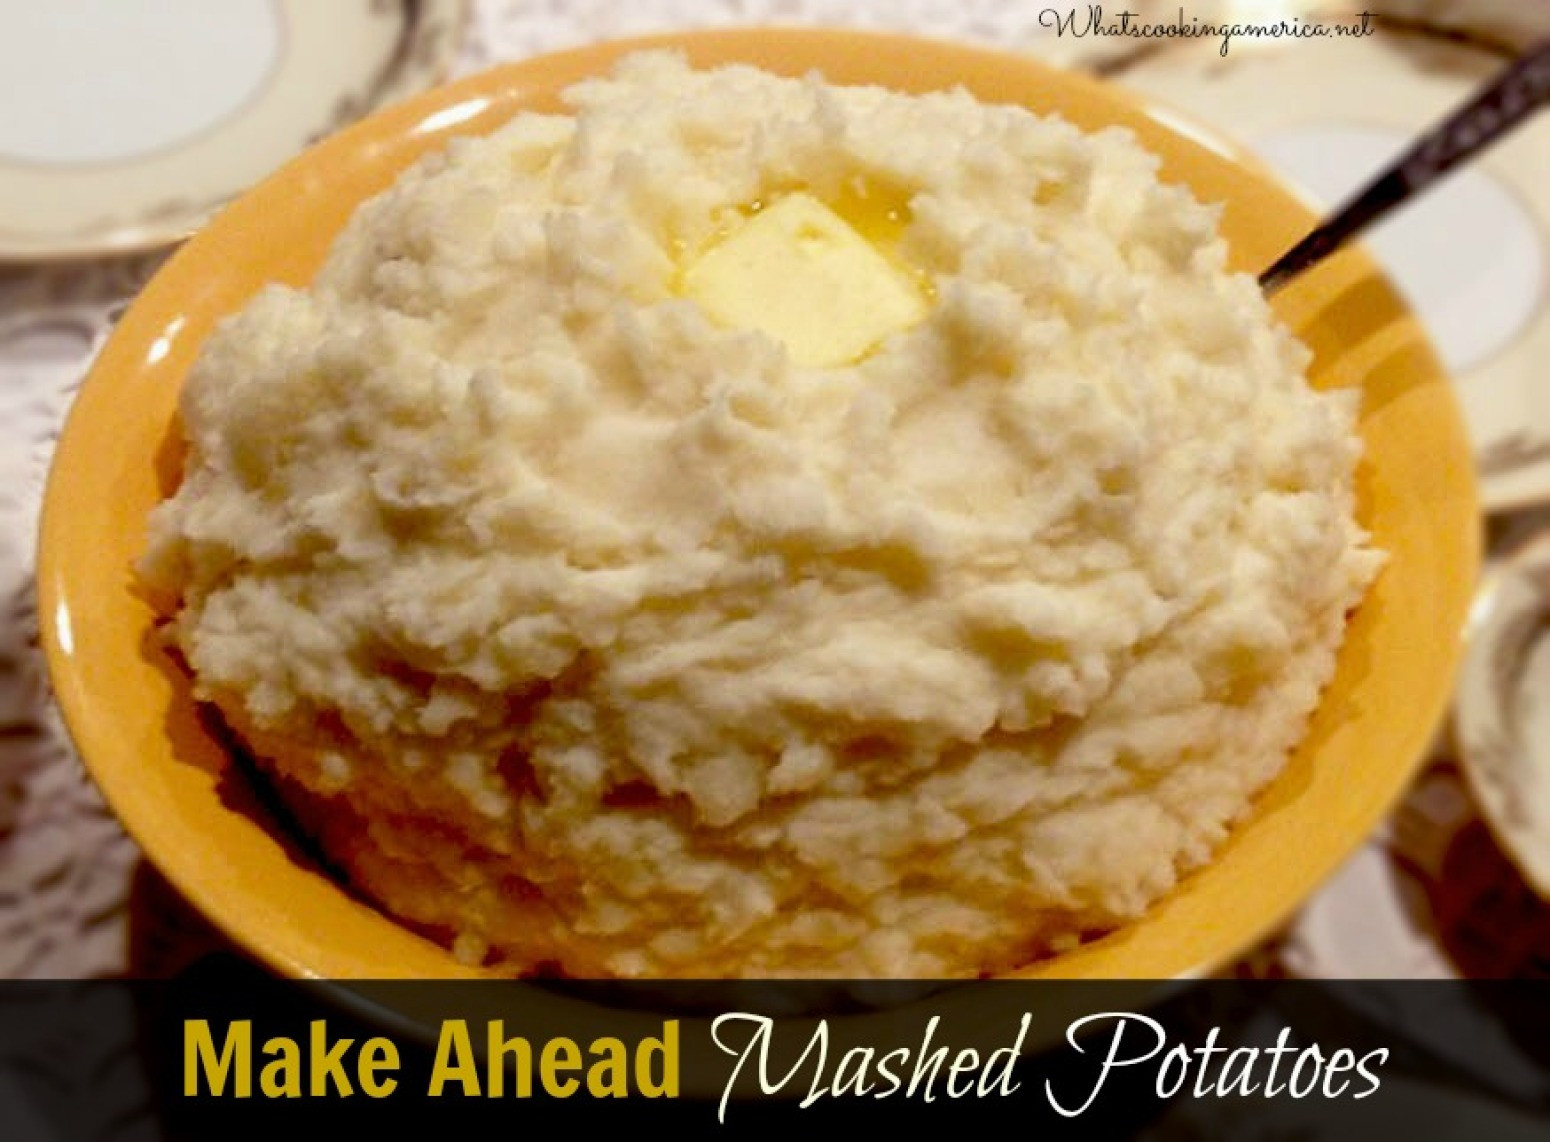 Make Ahead Mashed Potatoes Thanksgiving
 Best MakeAhead Mashed Potato Recipe Perfect Mashed Potato